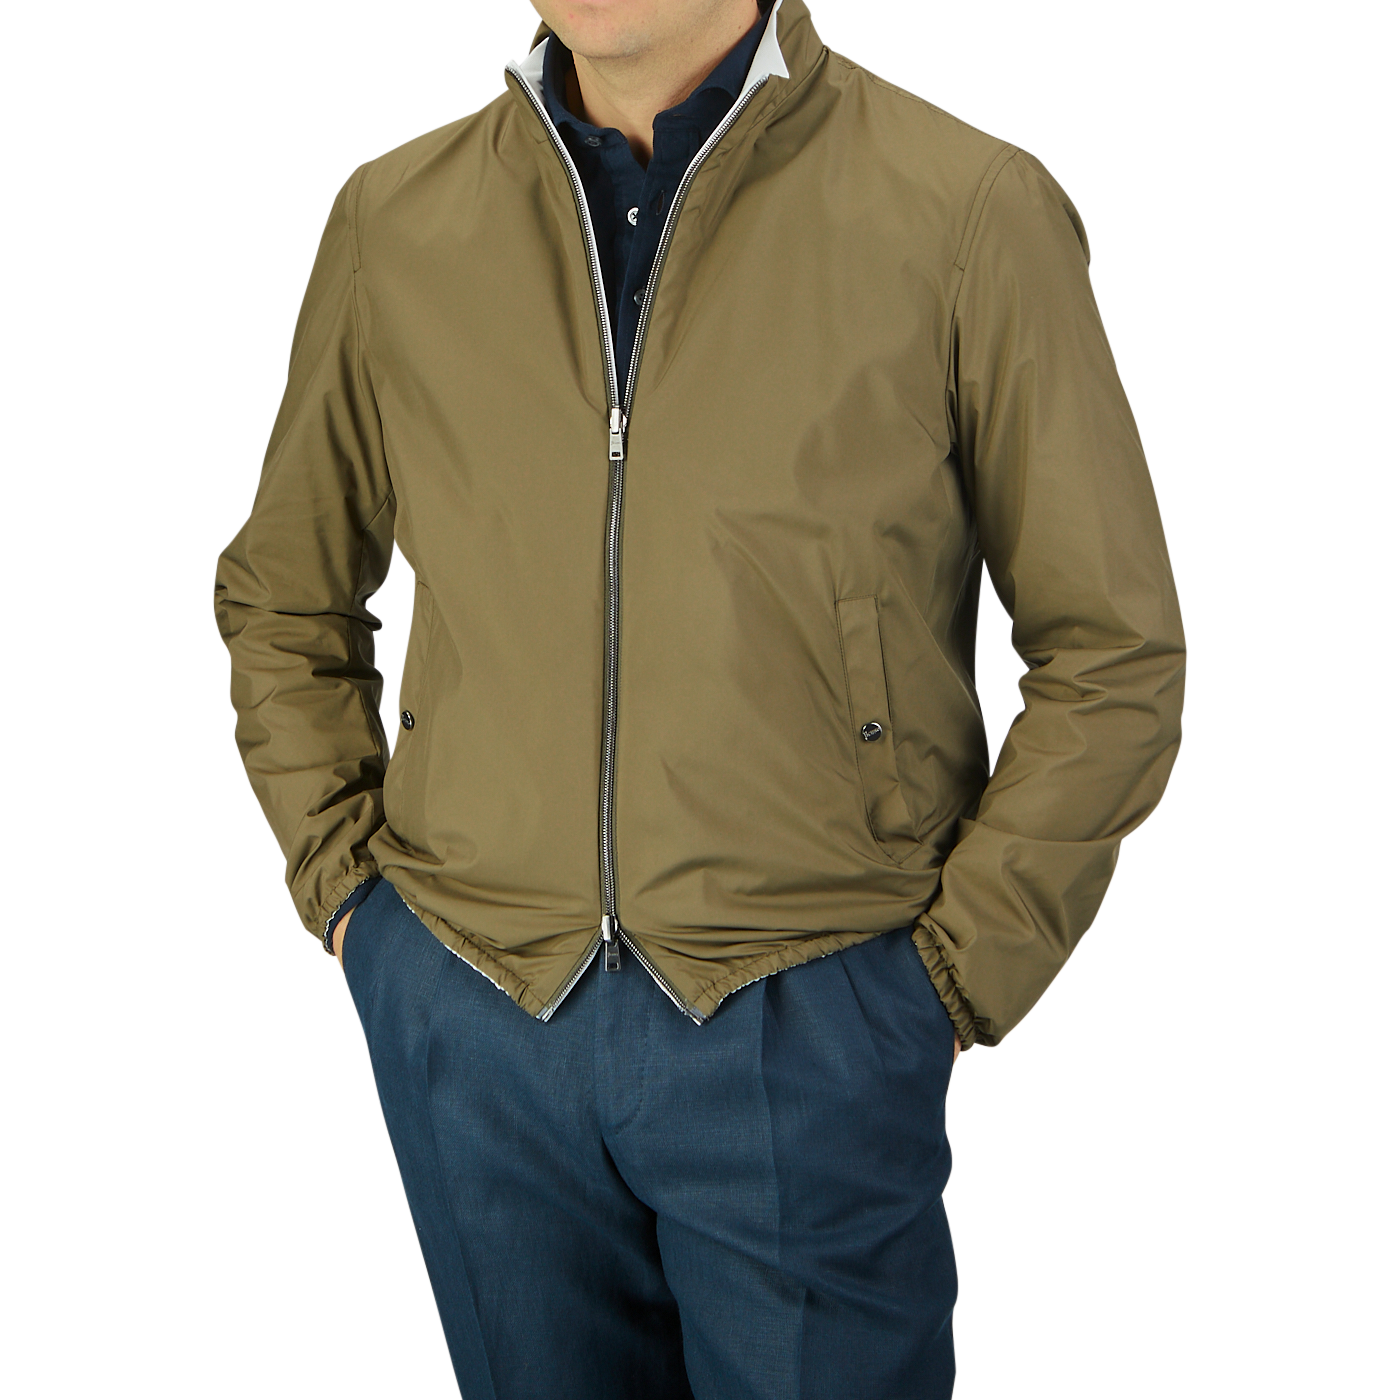 Man wearing a Herno olive green white reversible nylon blouson bomber jacket and blue trousers, hands in pockets, against a gray background. Head cropped from view.